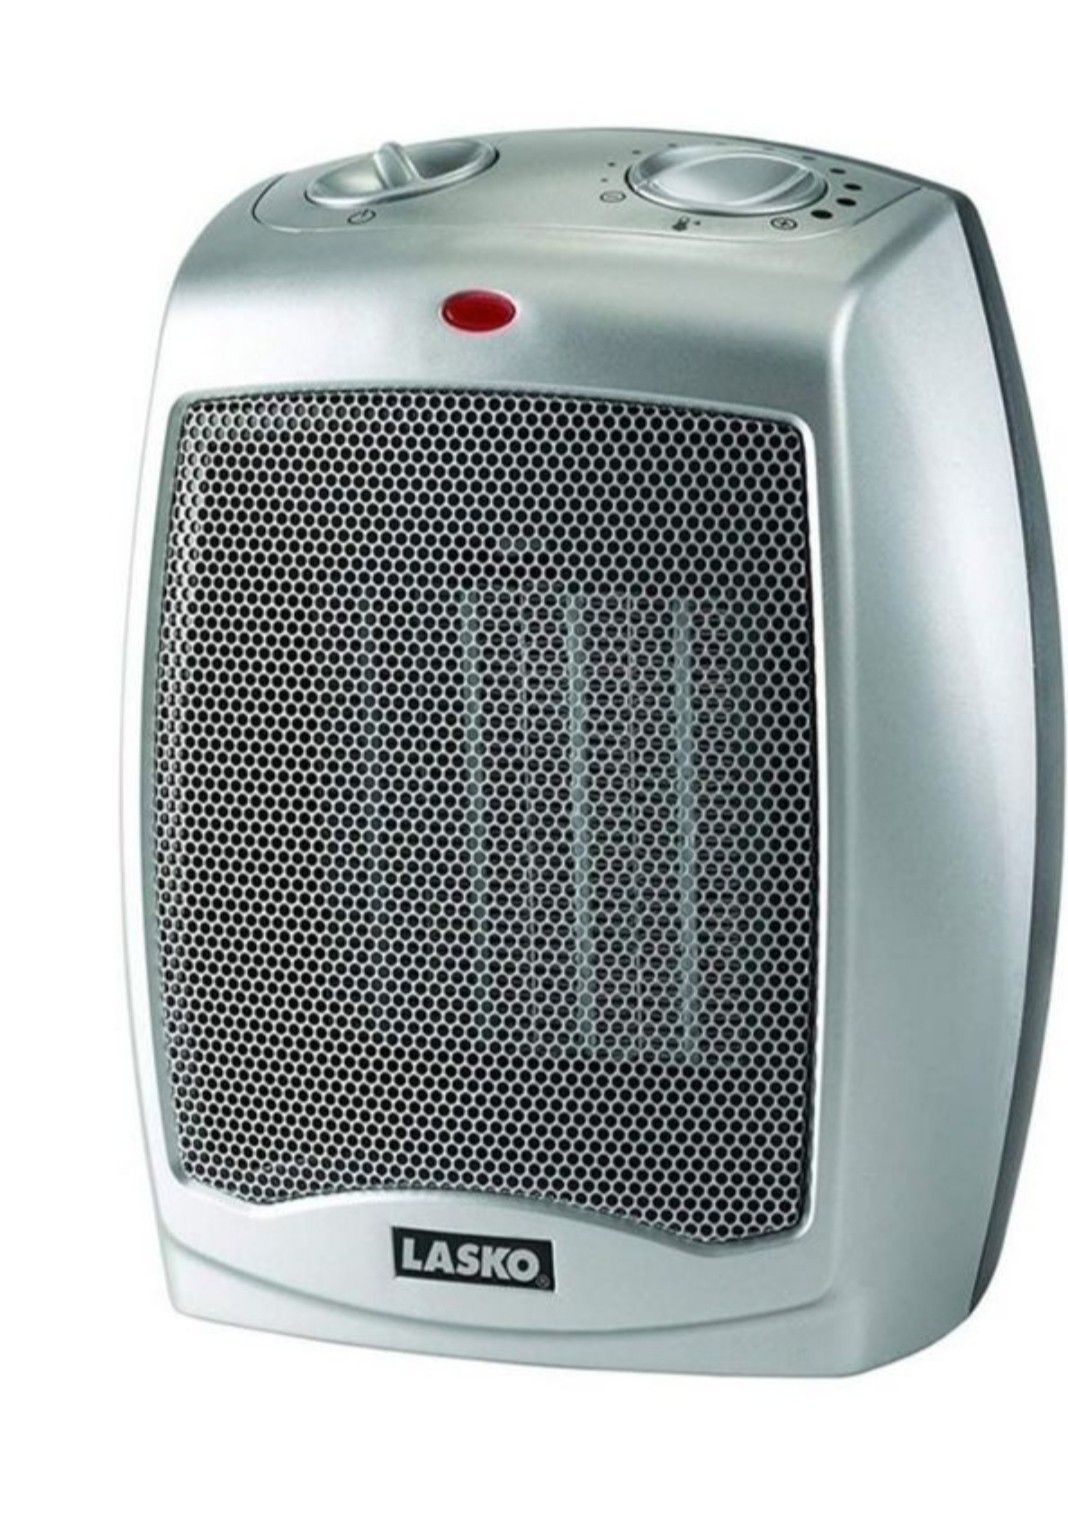 Lasko 754200 Ceramic Portable Space Heater with Adjustable Thermostat - Perfect For the Home or Home Office